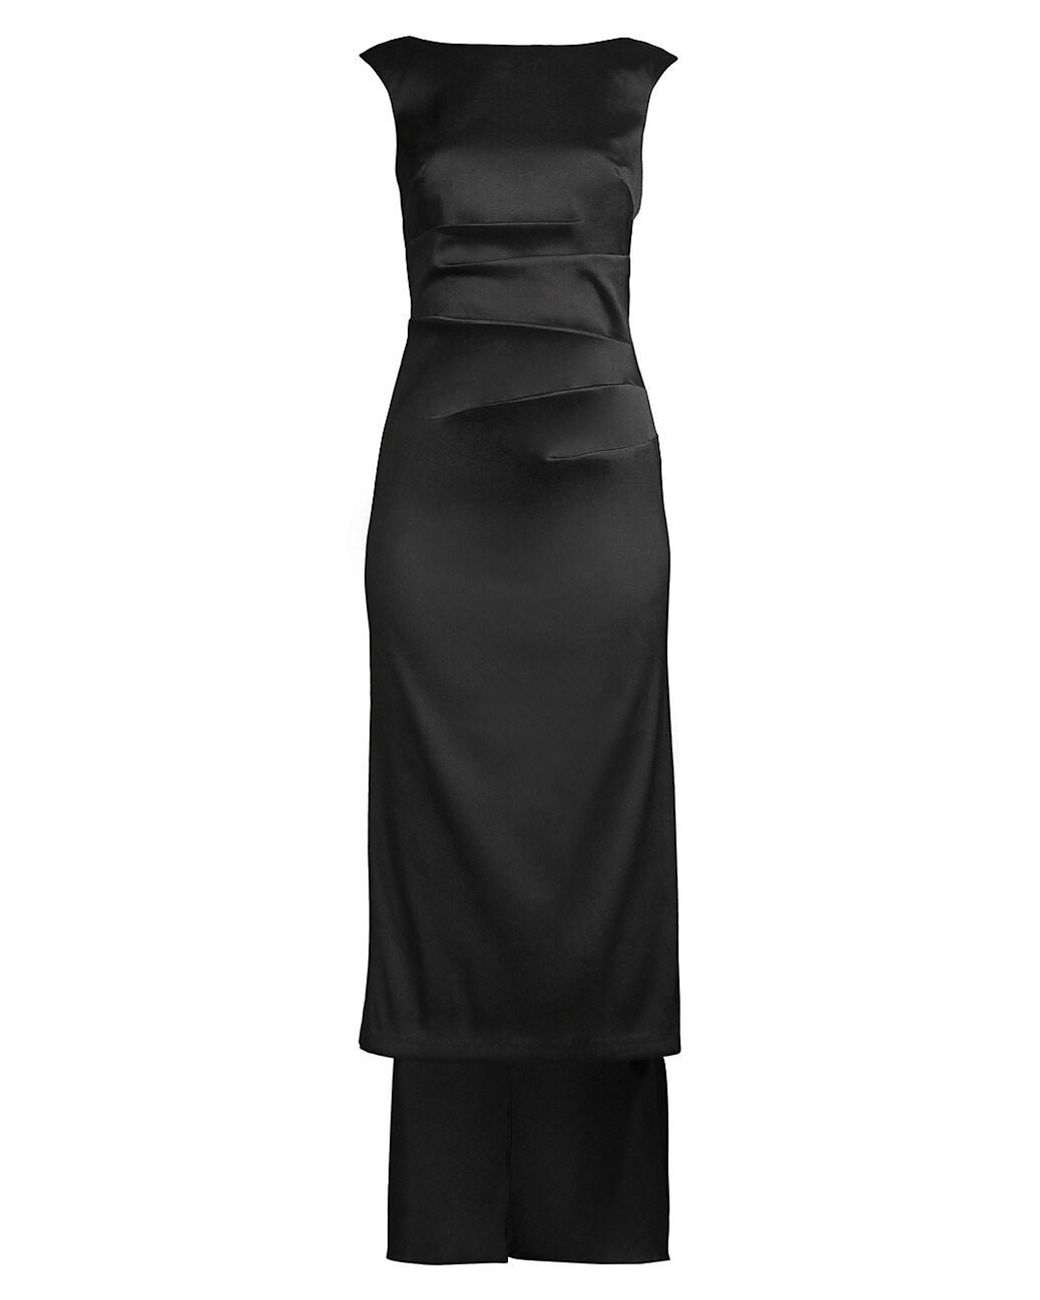 Aidan Mattox Ankle-length High-low Cocktail Dress in Black | Lyst